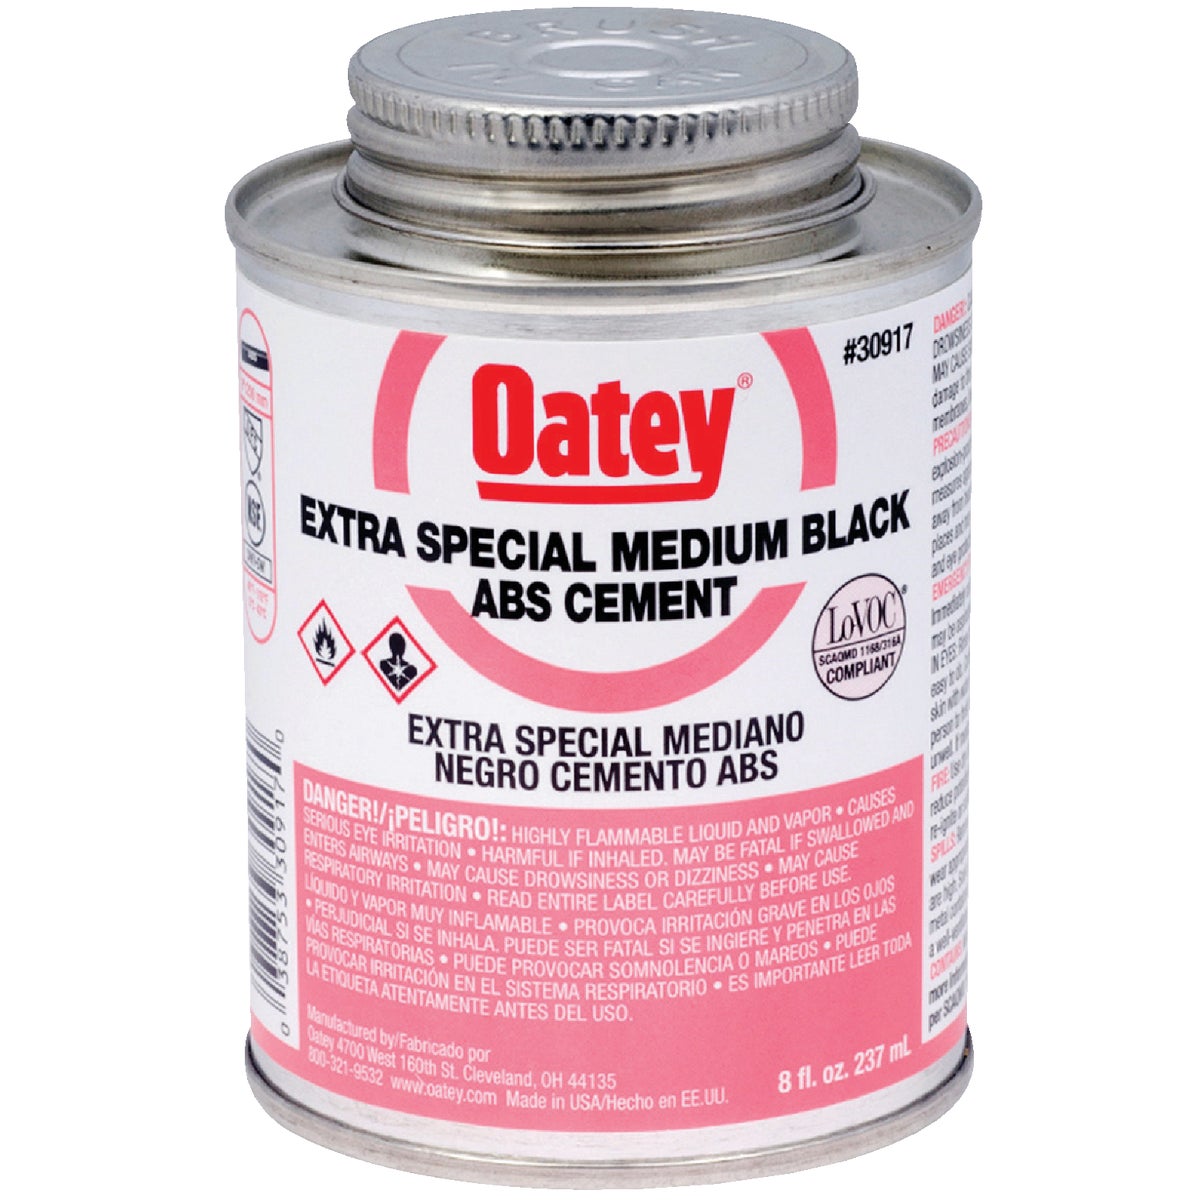 Oatey 8 Oz. Medium Bodied Black Extra Special ABS Cement